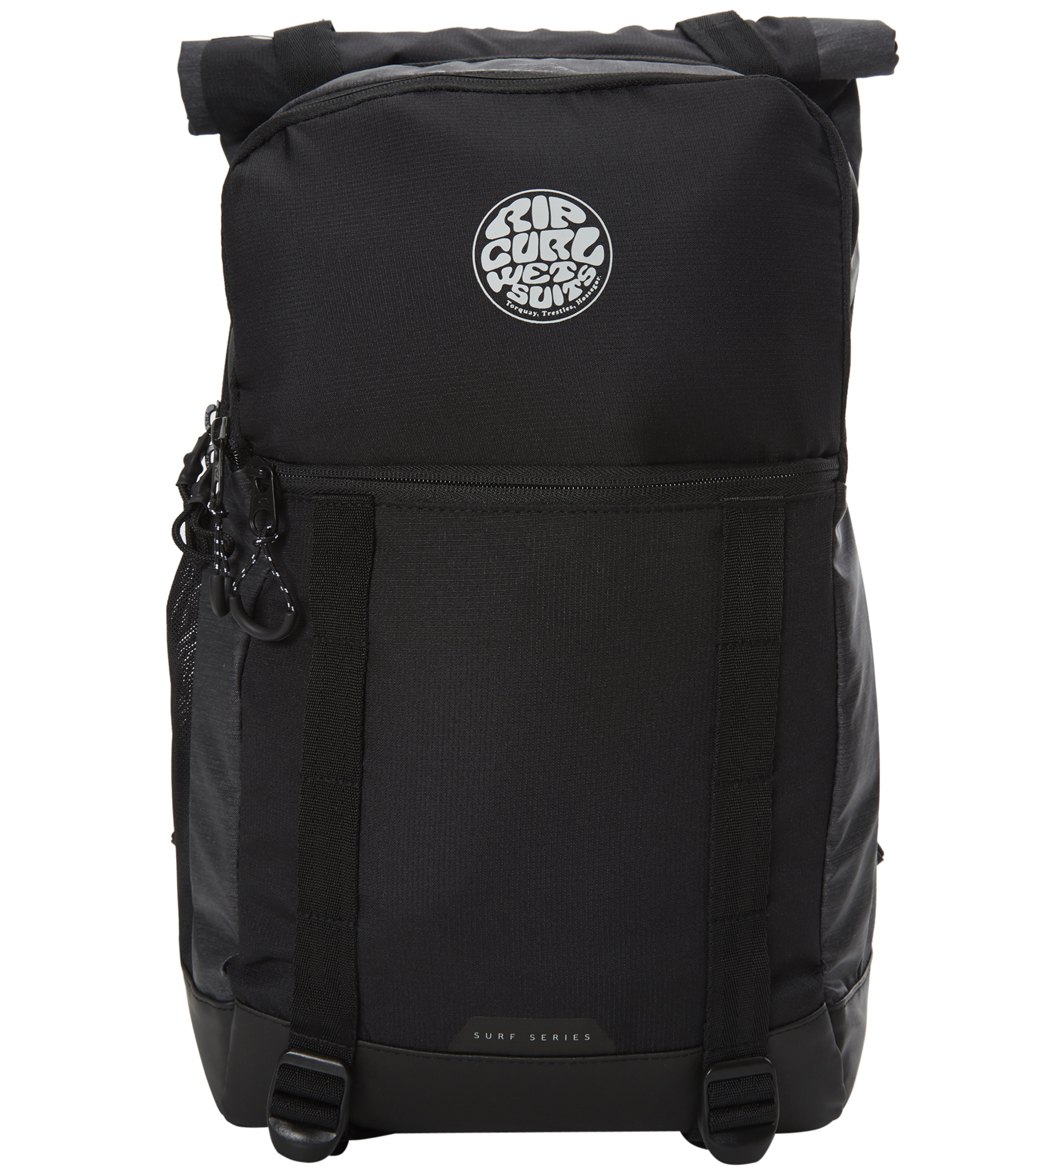 Rip Curl Men's Dawn Patrol Surf Backpack at SwimOutlet.com - Free Shipping